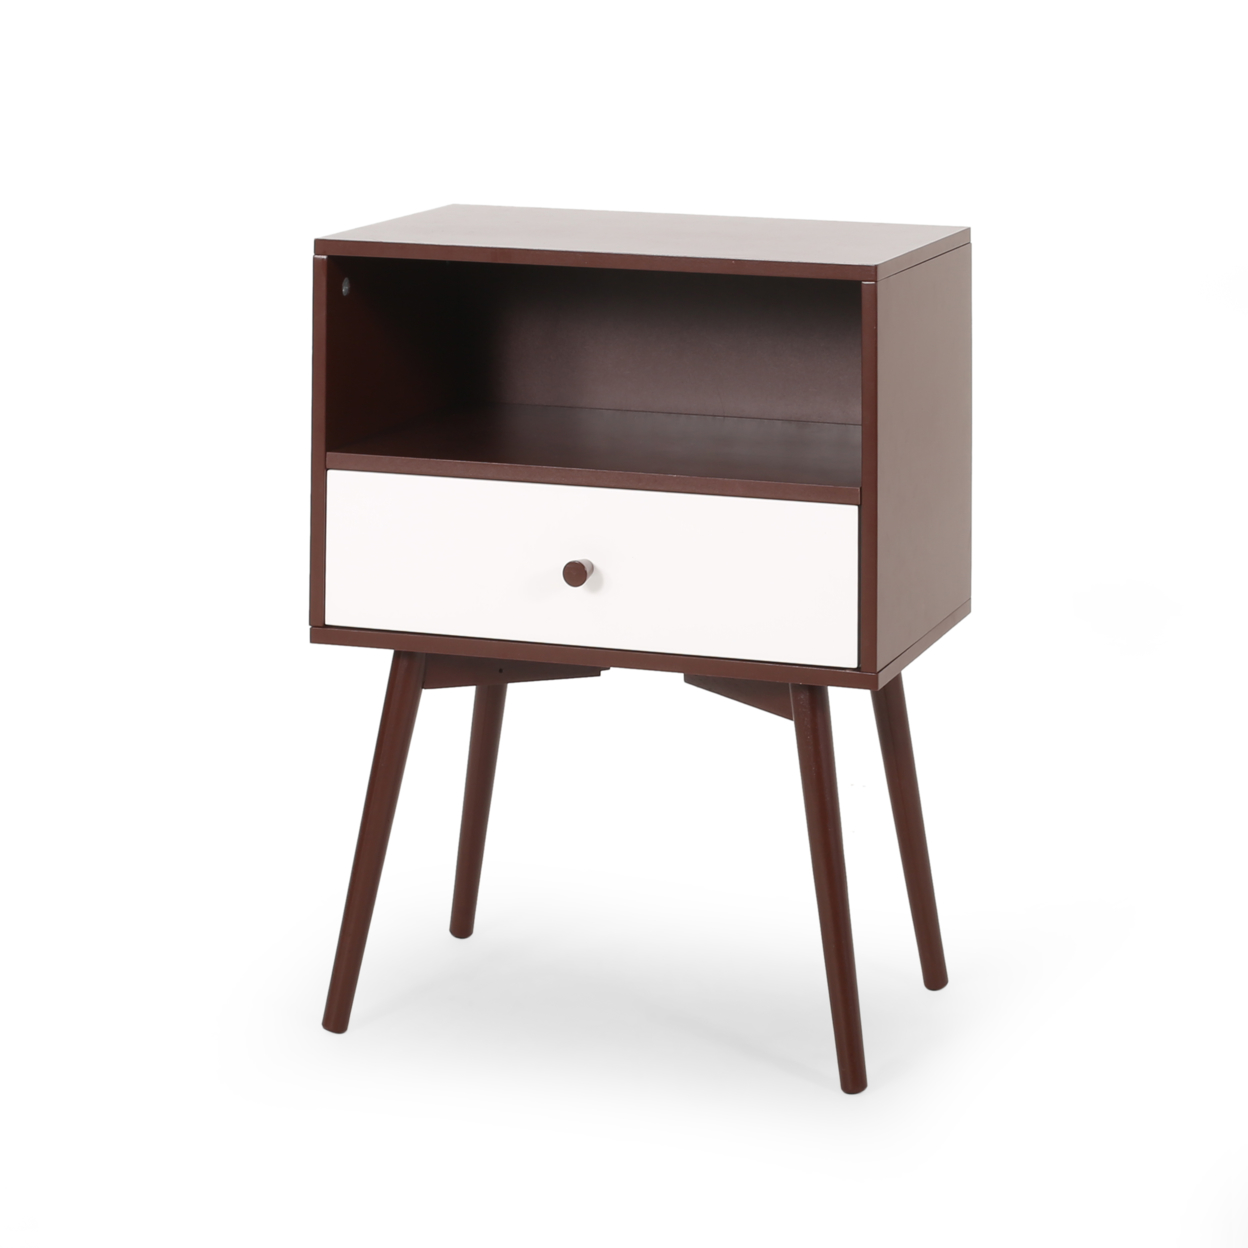 Alexis Mid-Century Modern Side Table - Brown + White